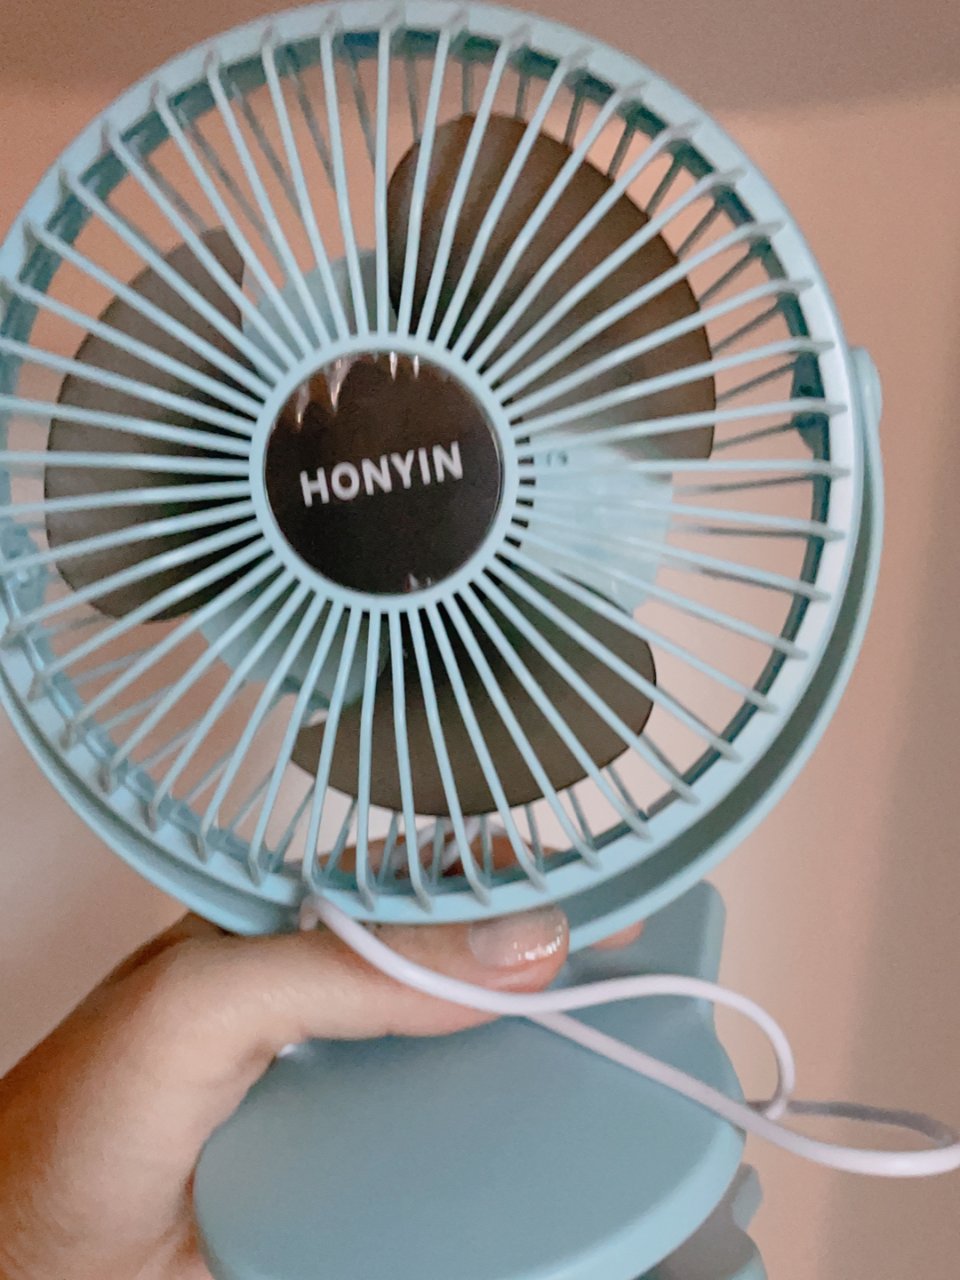 HONYIN USB Powered Stroller Fan—6 Inch Clip on Fan, Portable Cooling Fan with 3 Speeds, Sturdy Clamp, 360° Rotate USB Fan for Desk, Personal Quiet Electric Fan for Library Bedroom Camping: Home & Kitchen